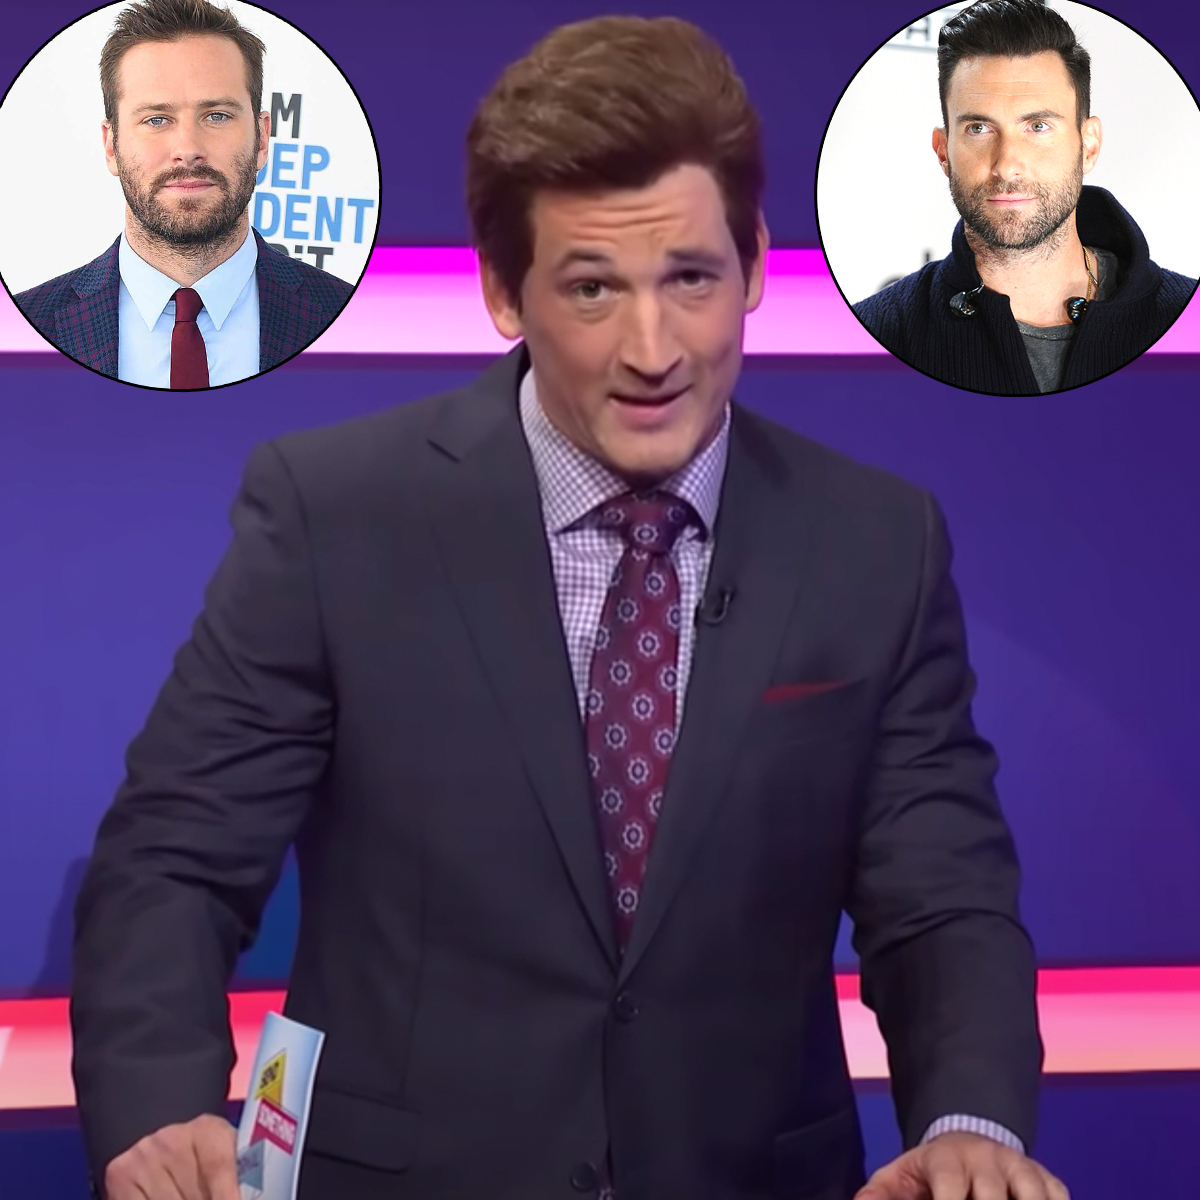 SNL Pokes Fun at Adam Levine and Armie Hammer’s DM Scandals